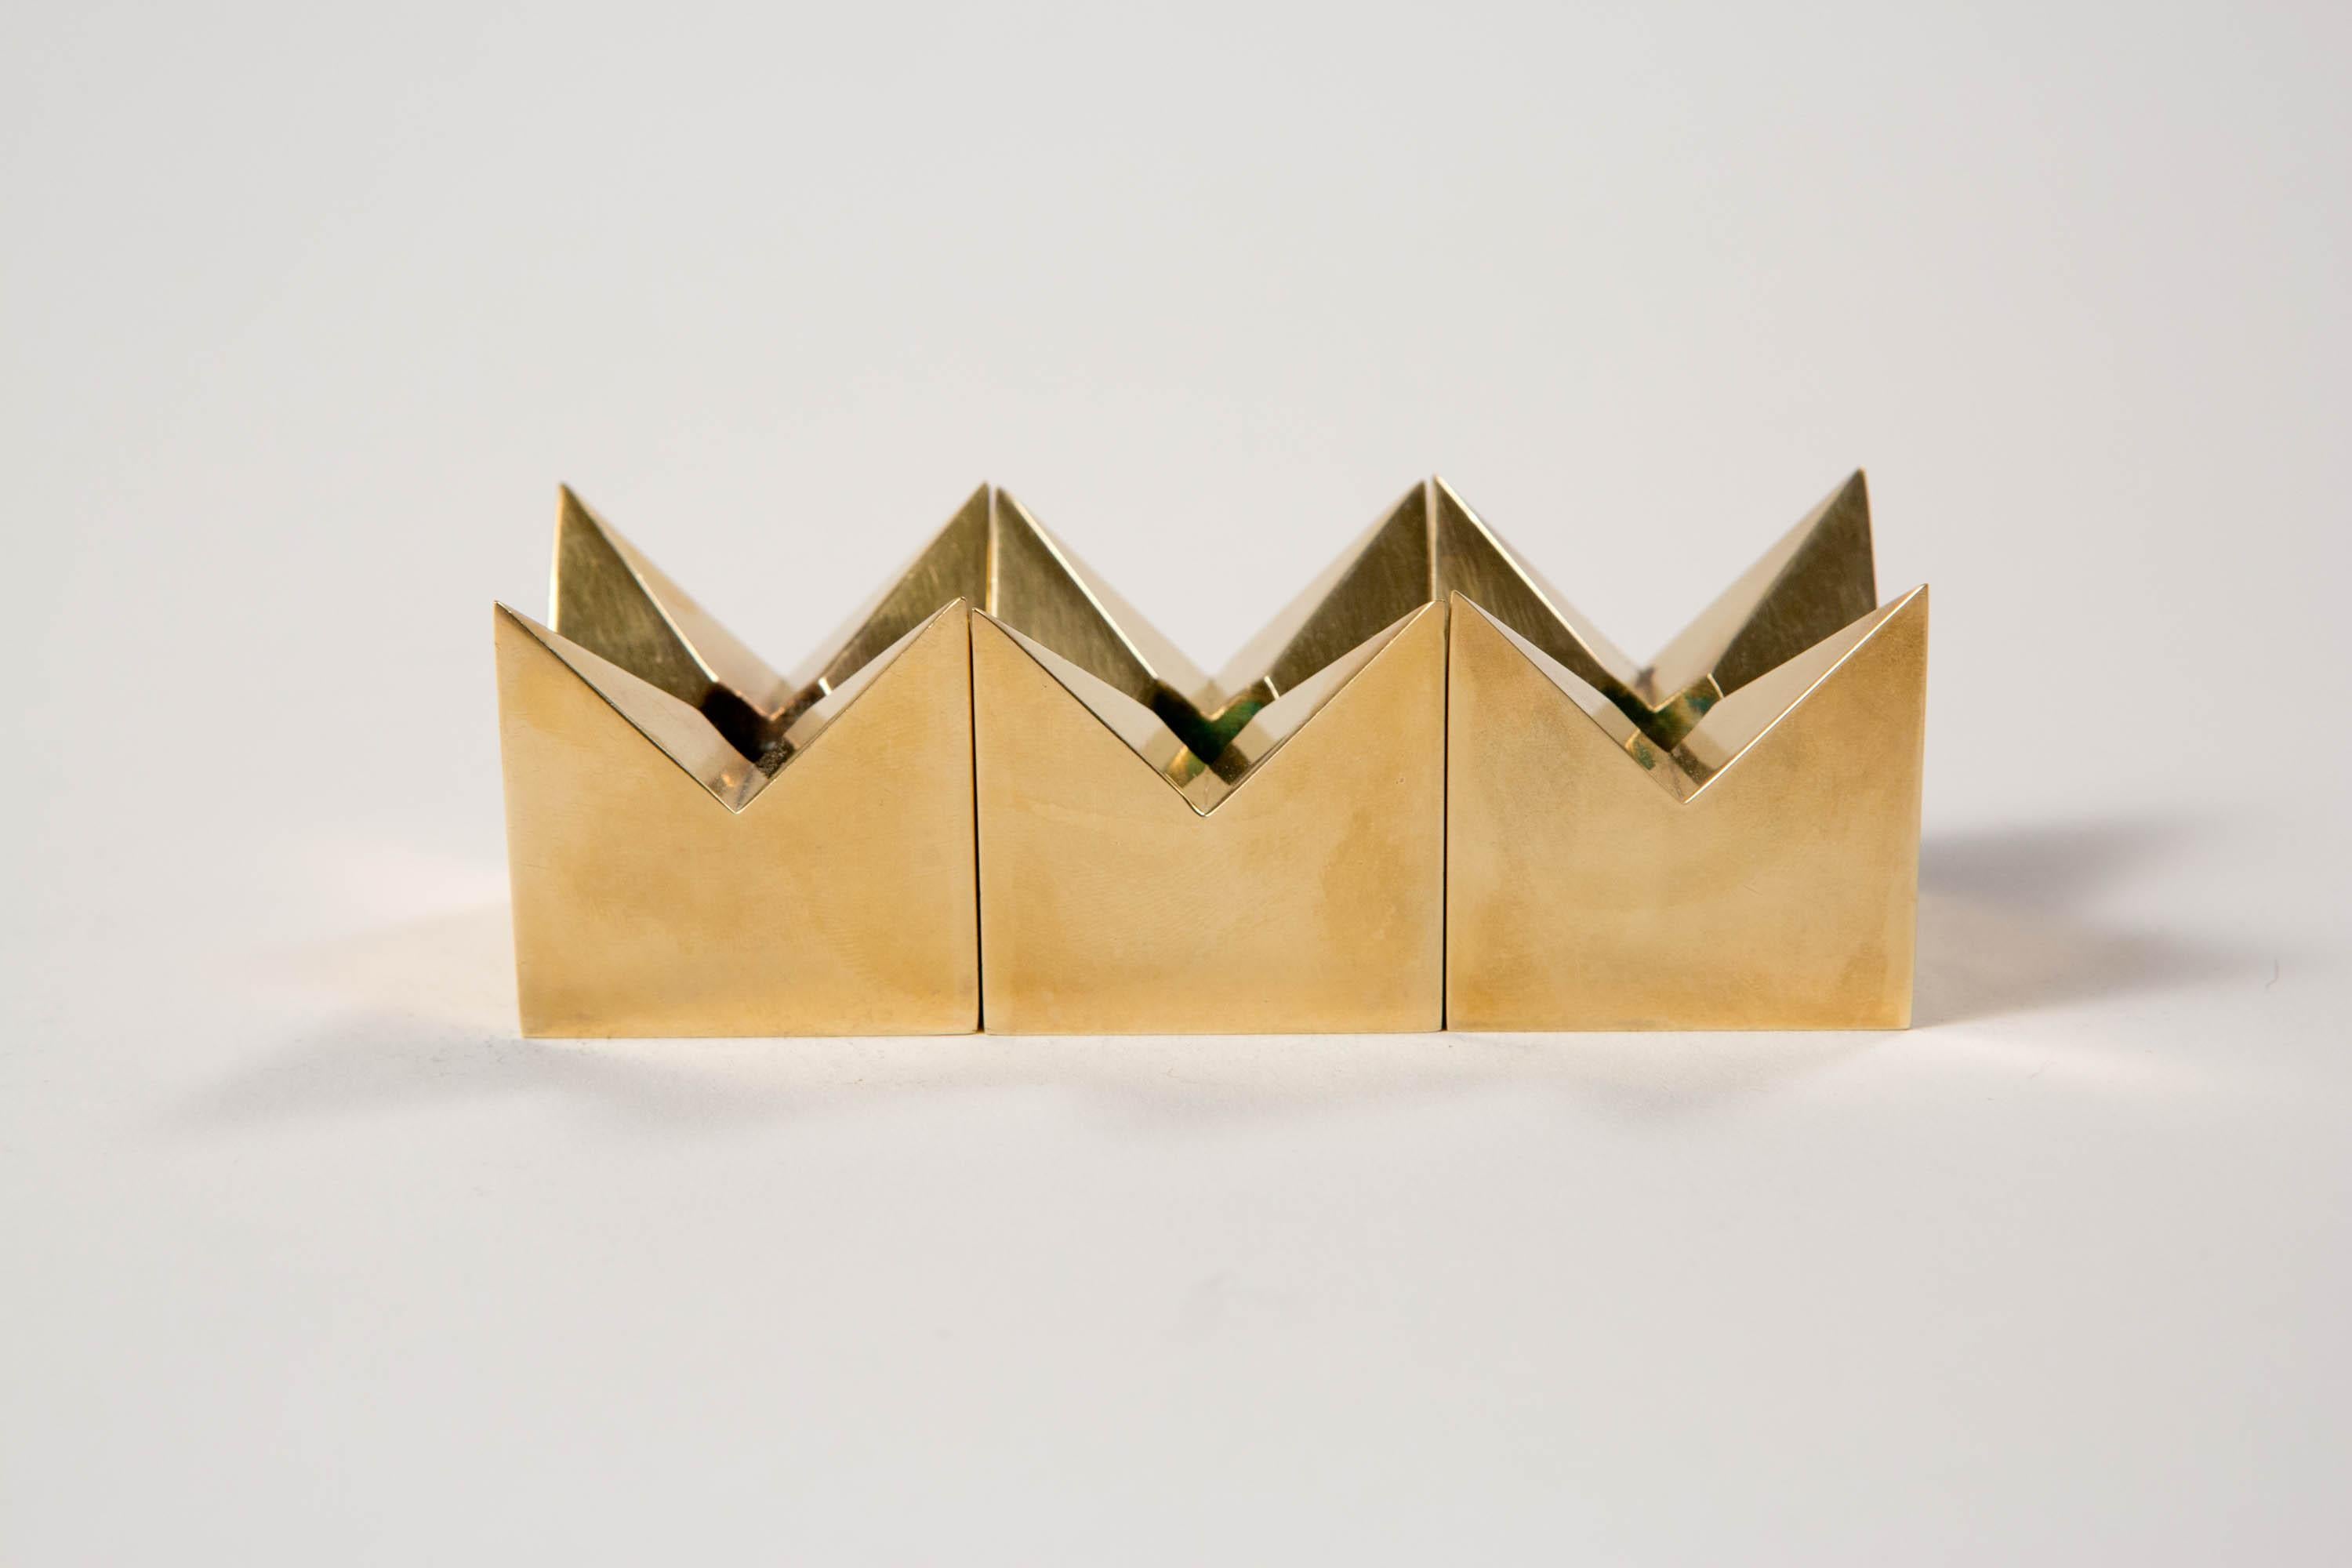 Pierre Forssell - 3 Brass Star Candleholders for Skultuna, Sweden, 1960s

Maker's mark and signature on bottom.

Pierre Forsell (1925 - 2004) grew up in central Stockholm. He was trained as a silversmith and got his journeyman's certificate in